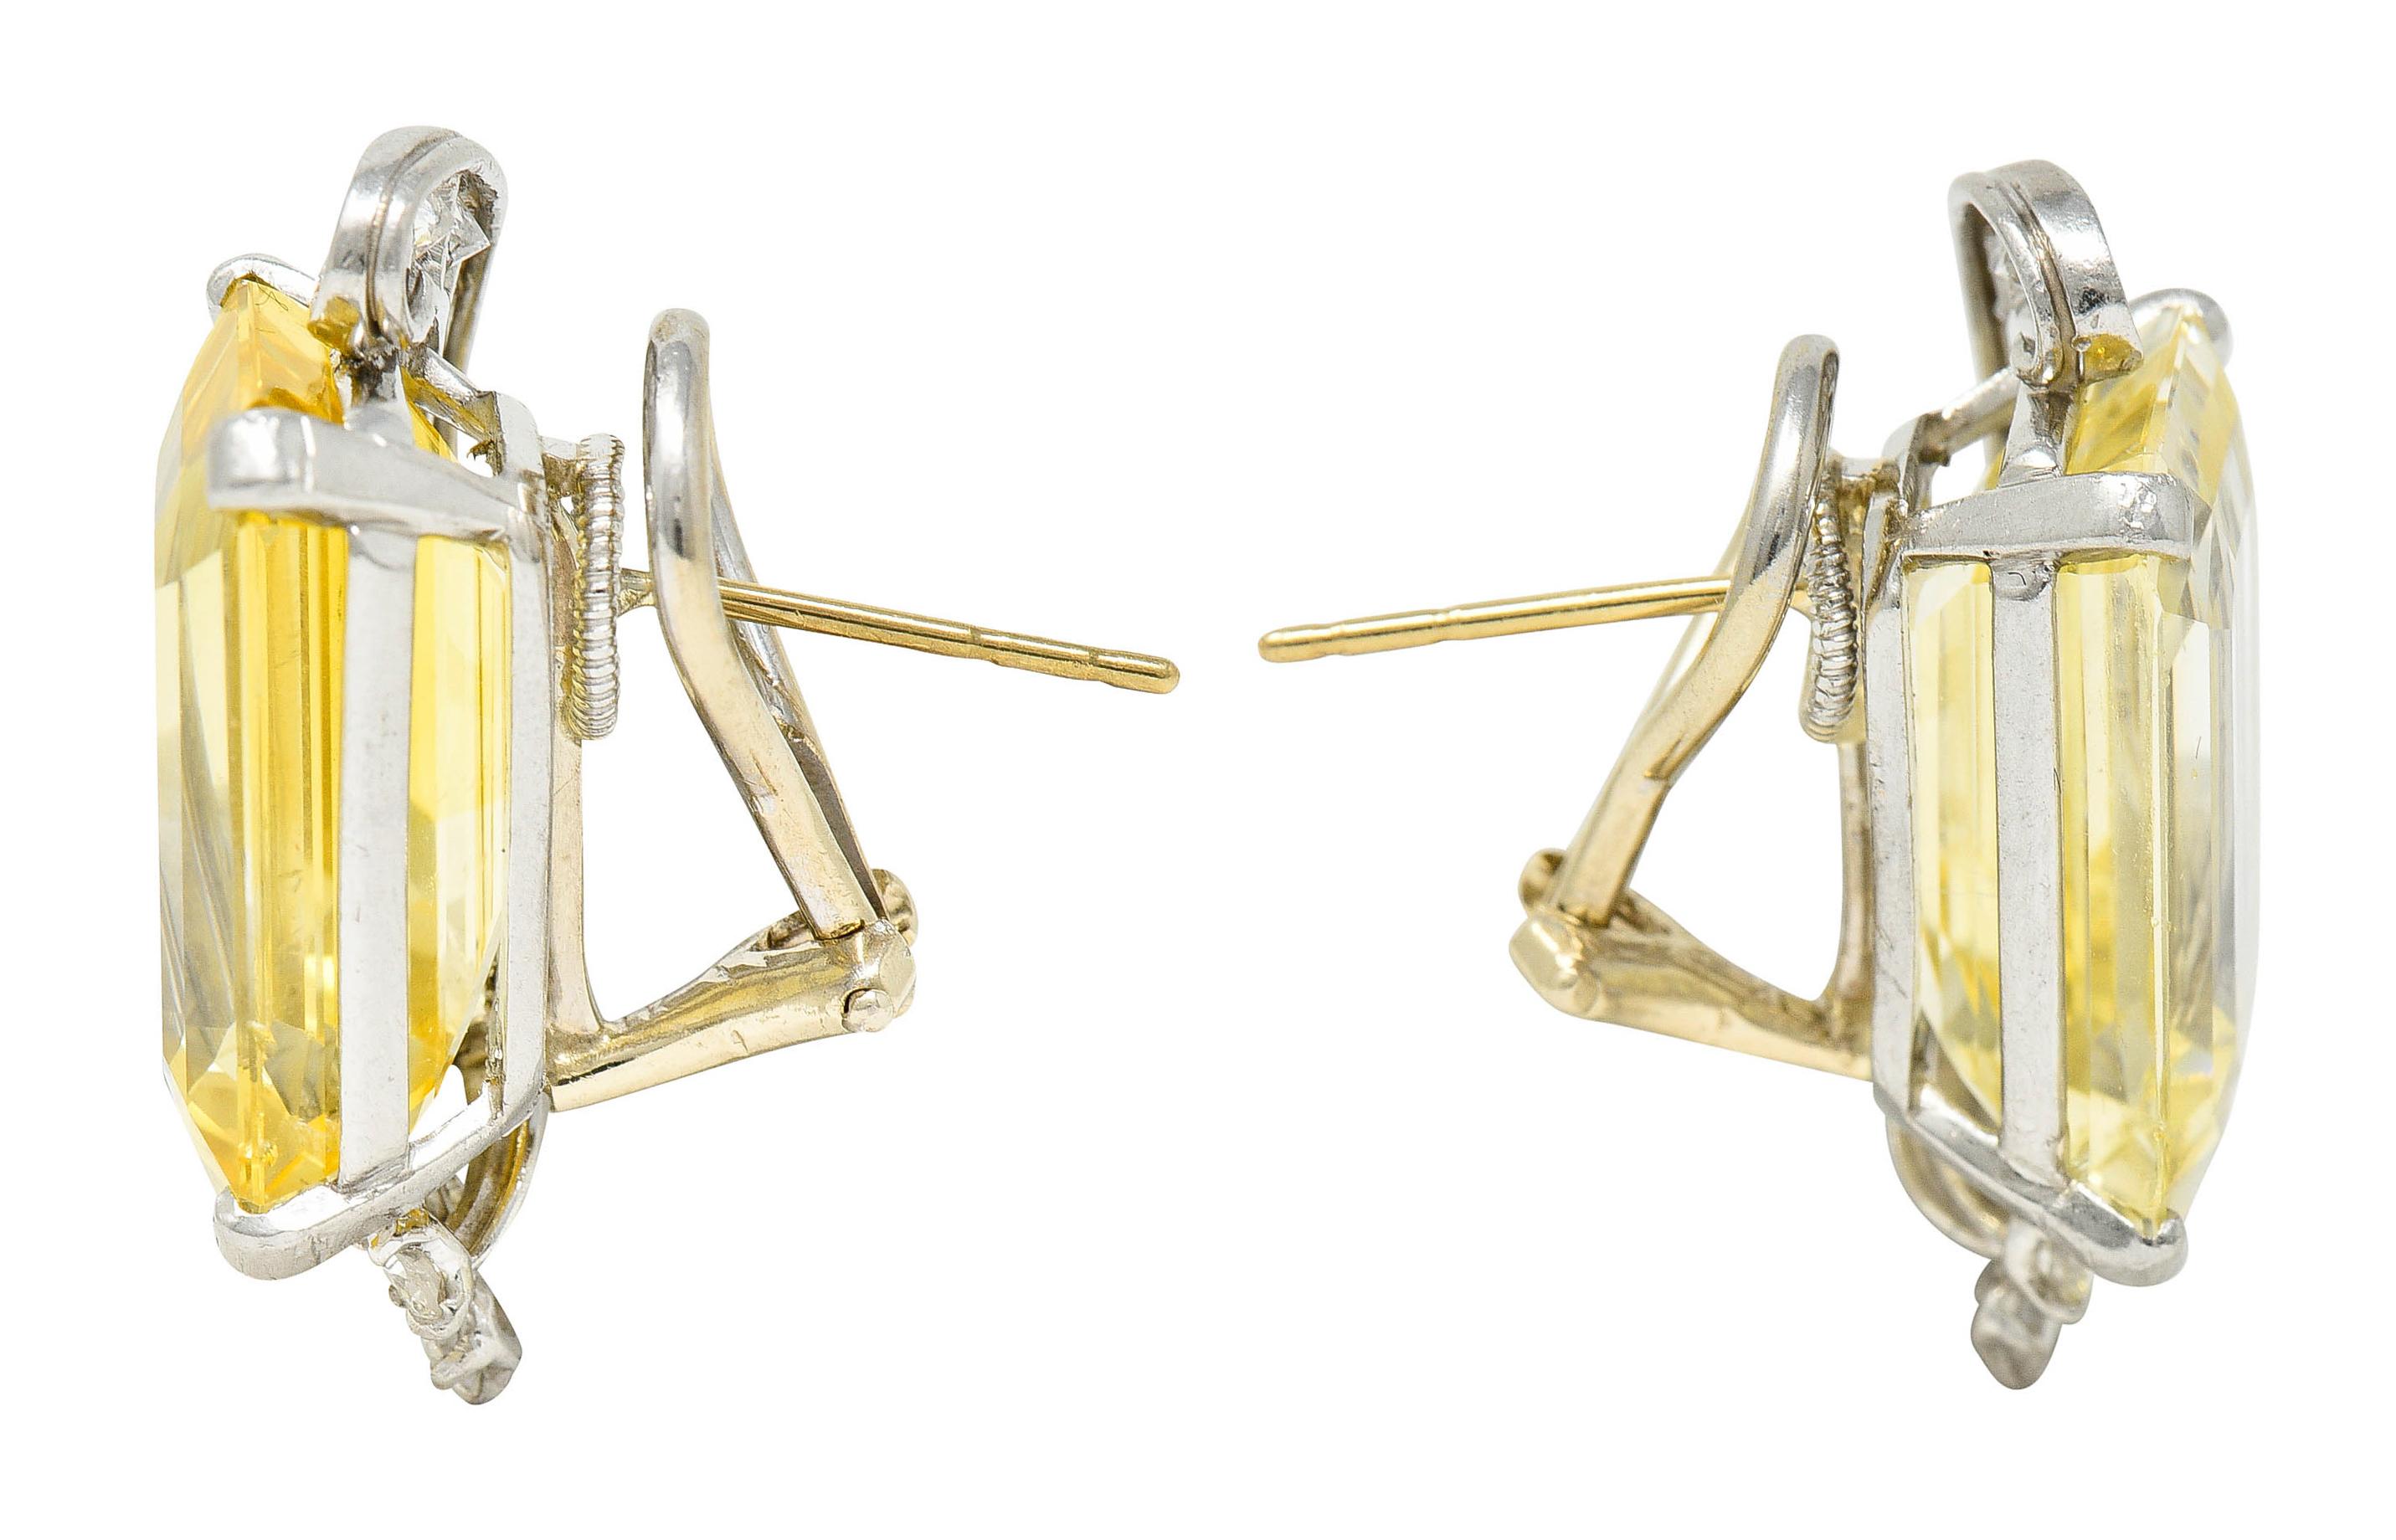 Earrings feature emerald cut yellow sapphires weighing in total approximately 27.50 carats

Very well matched in medium light color and very eye clean with one minor surface reaching inclusion

Basket set by wide prongs with a sweeping platinum